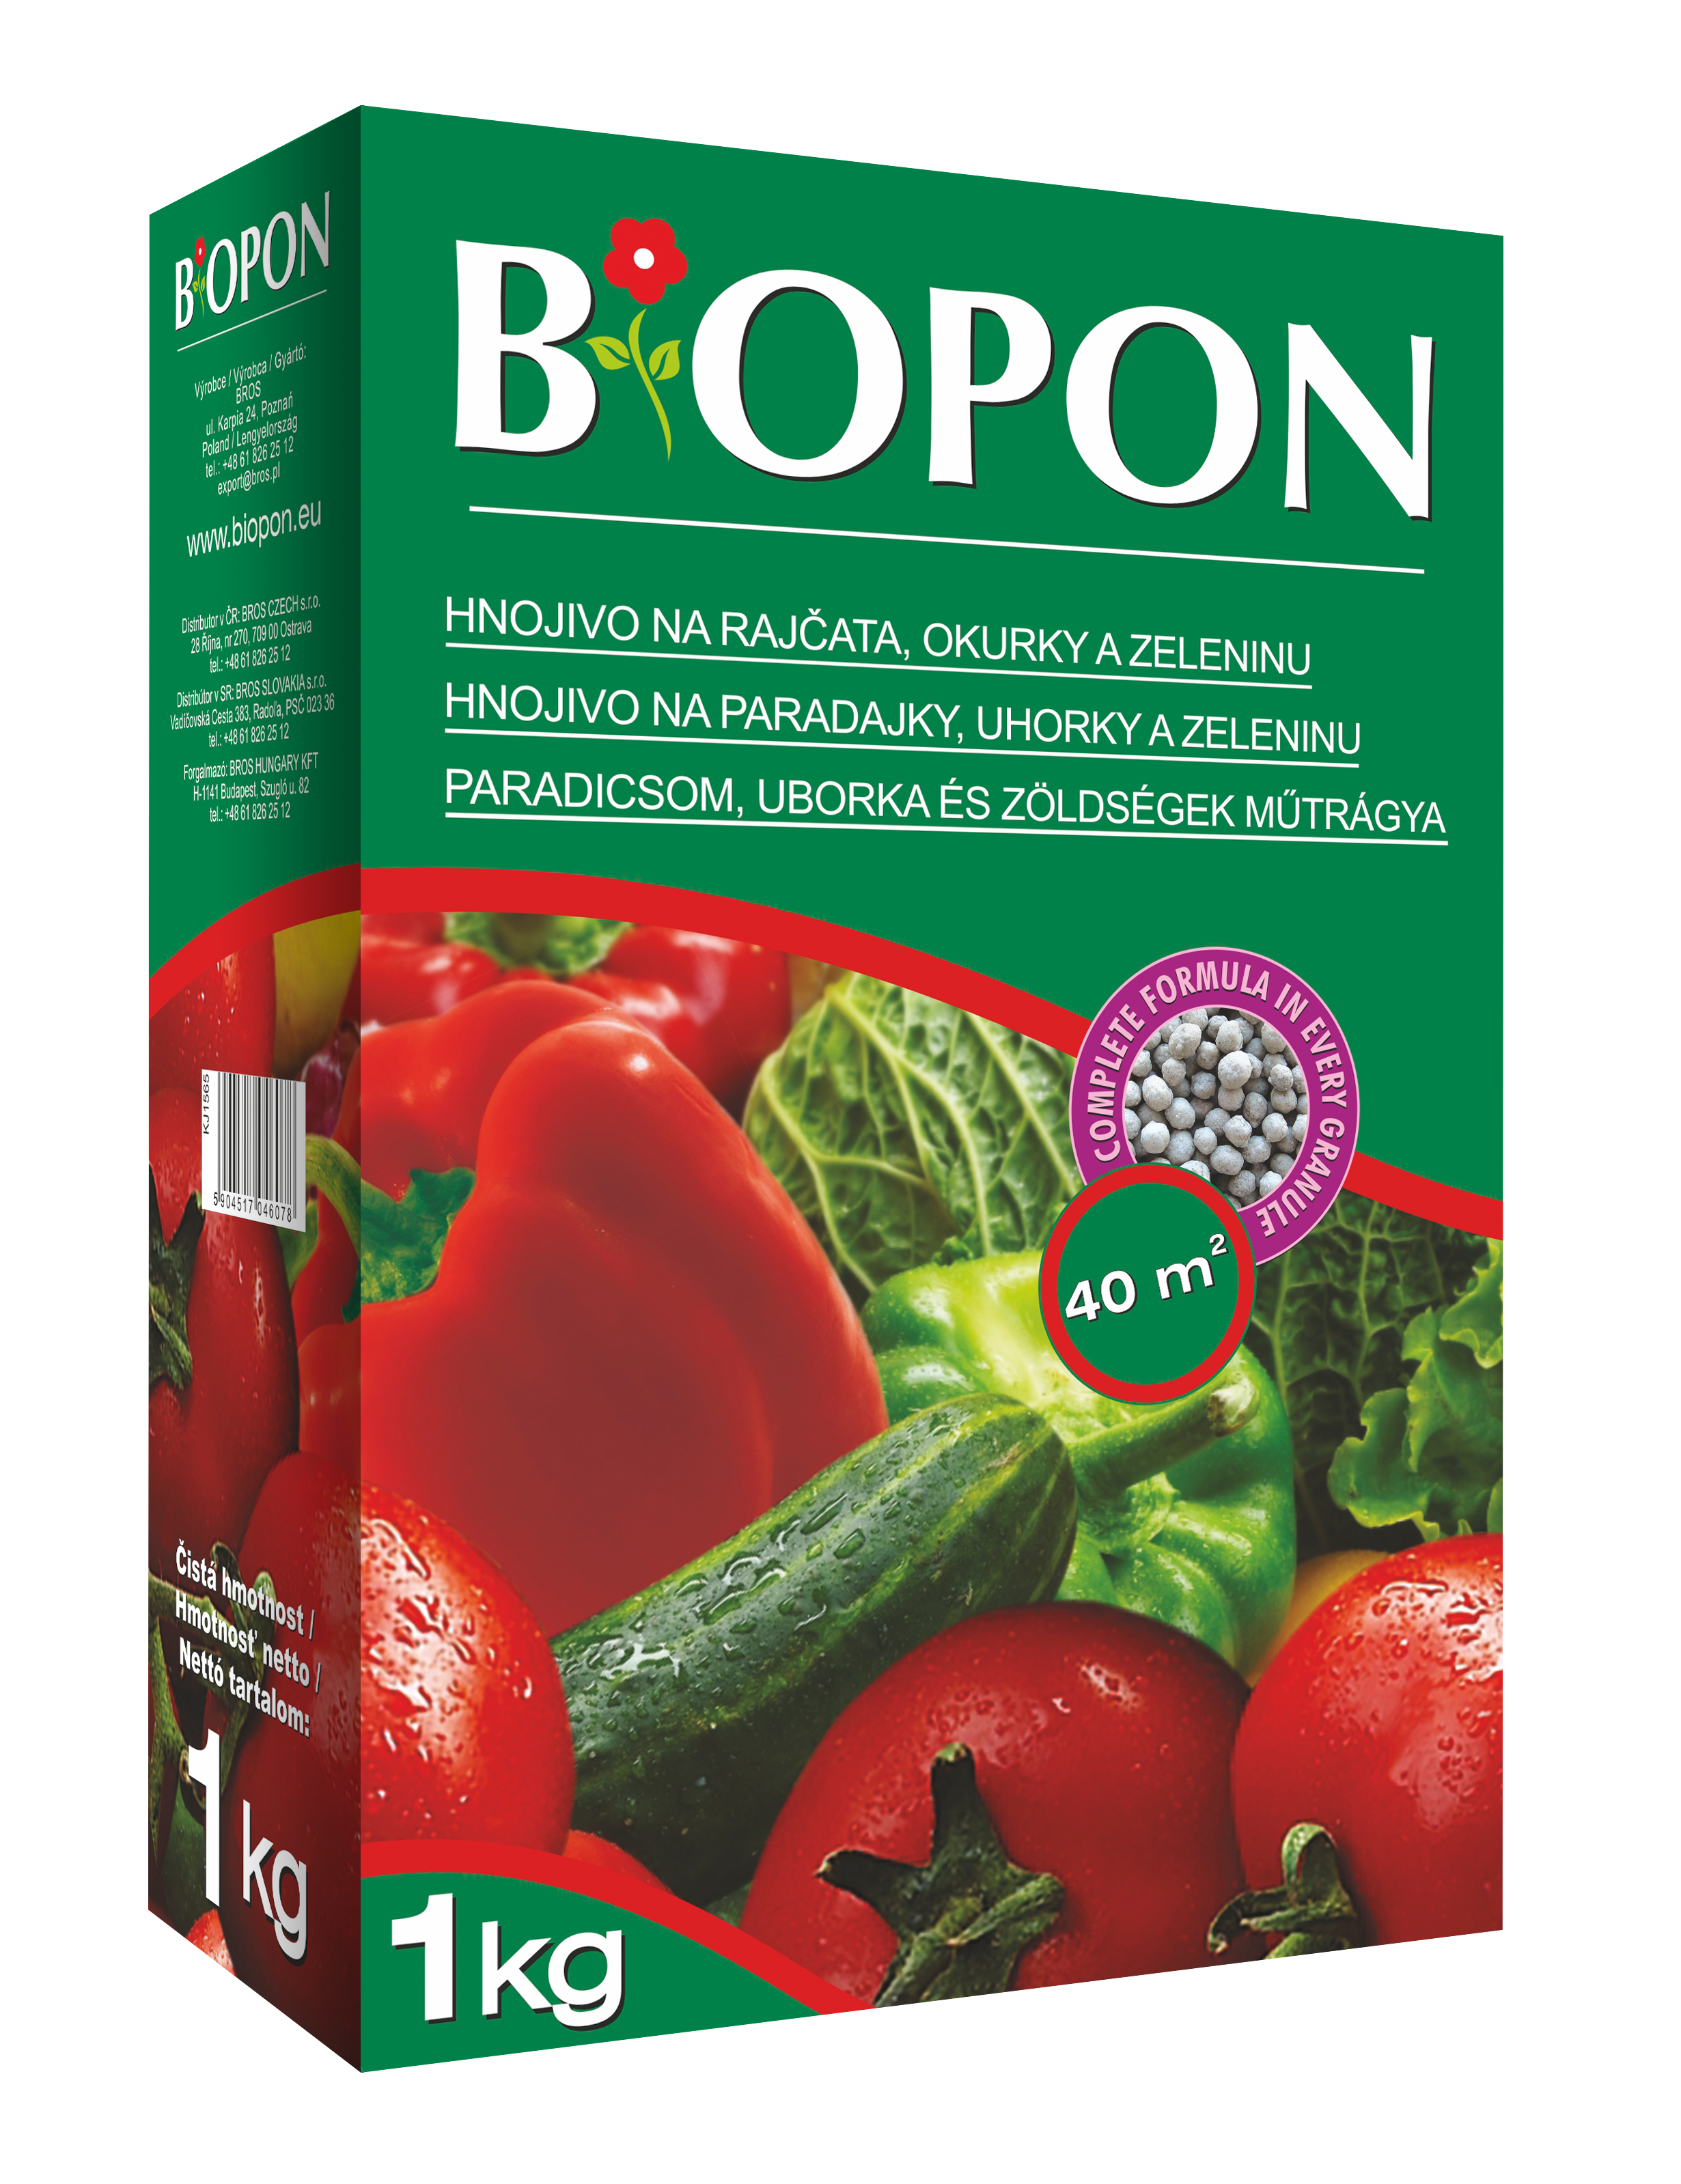 Biopon fertilizer for tomatoes, cucumbers and vegetables 1 kg